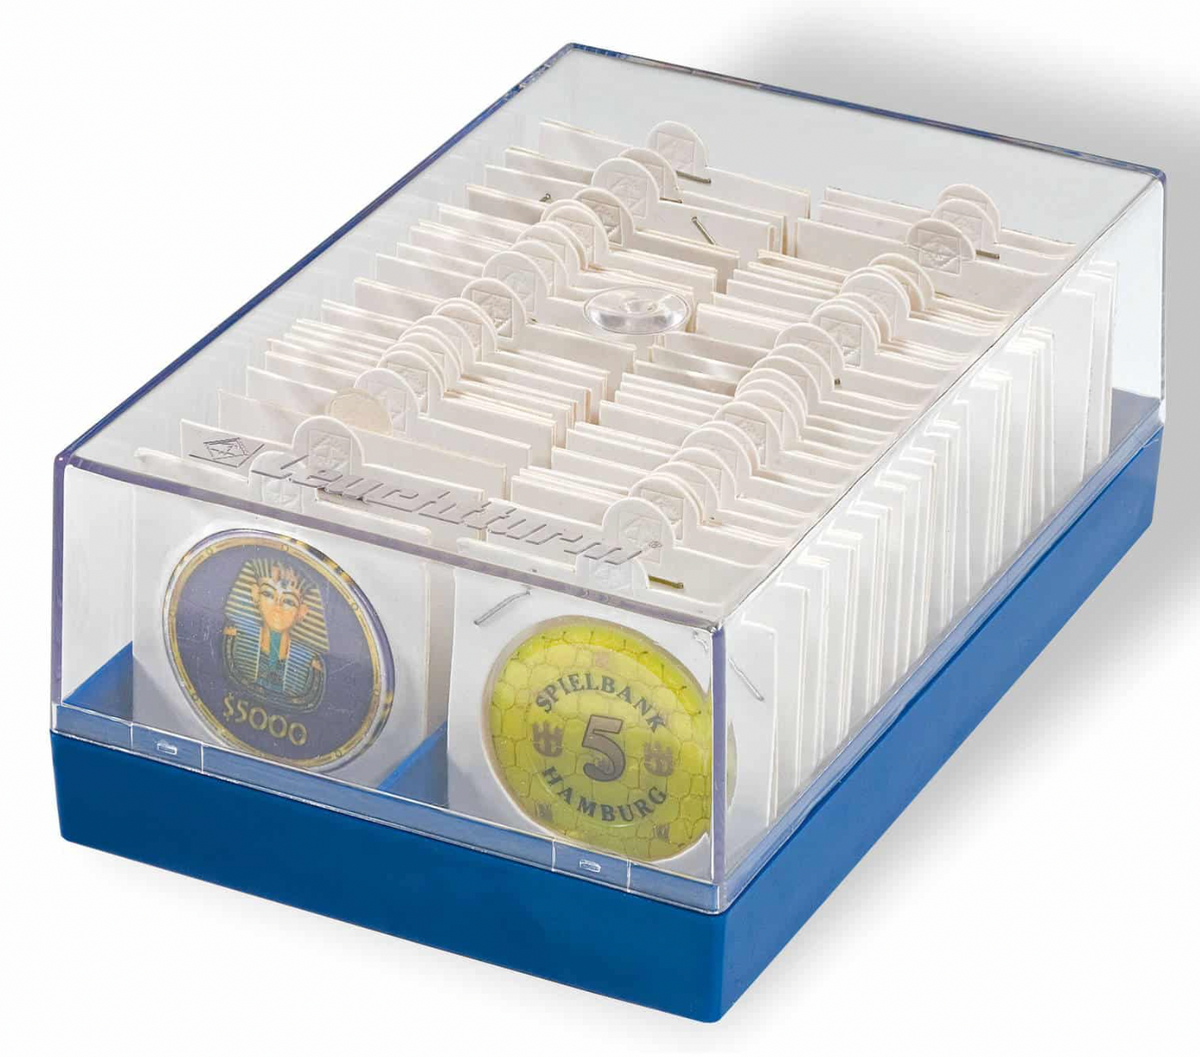 Plastic box for 100 2 X 2 coin holders, blue